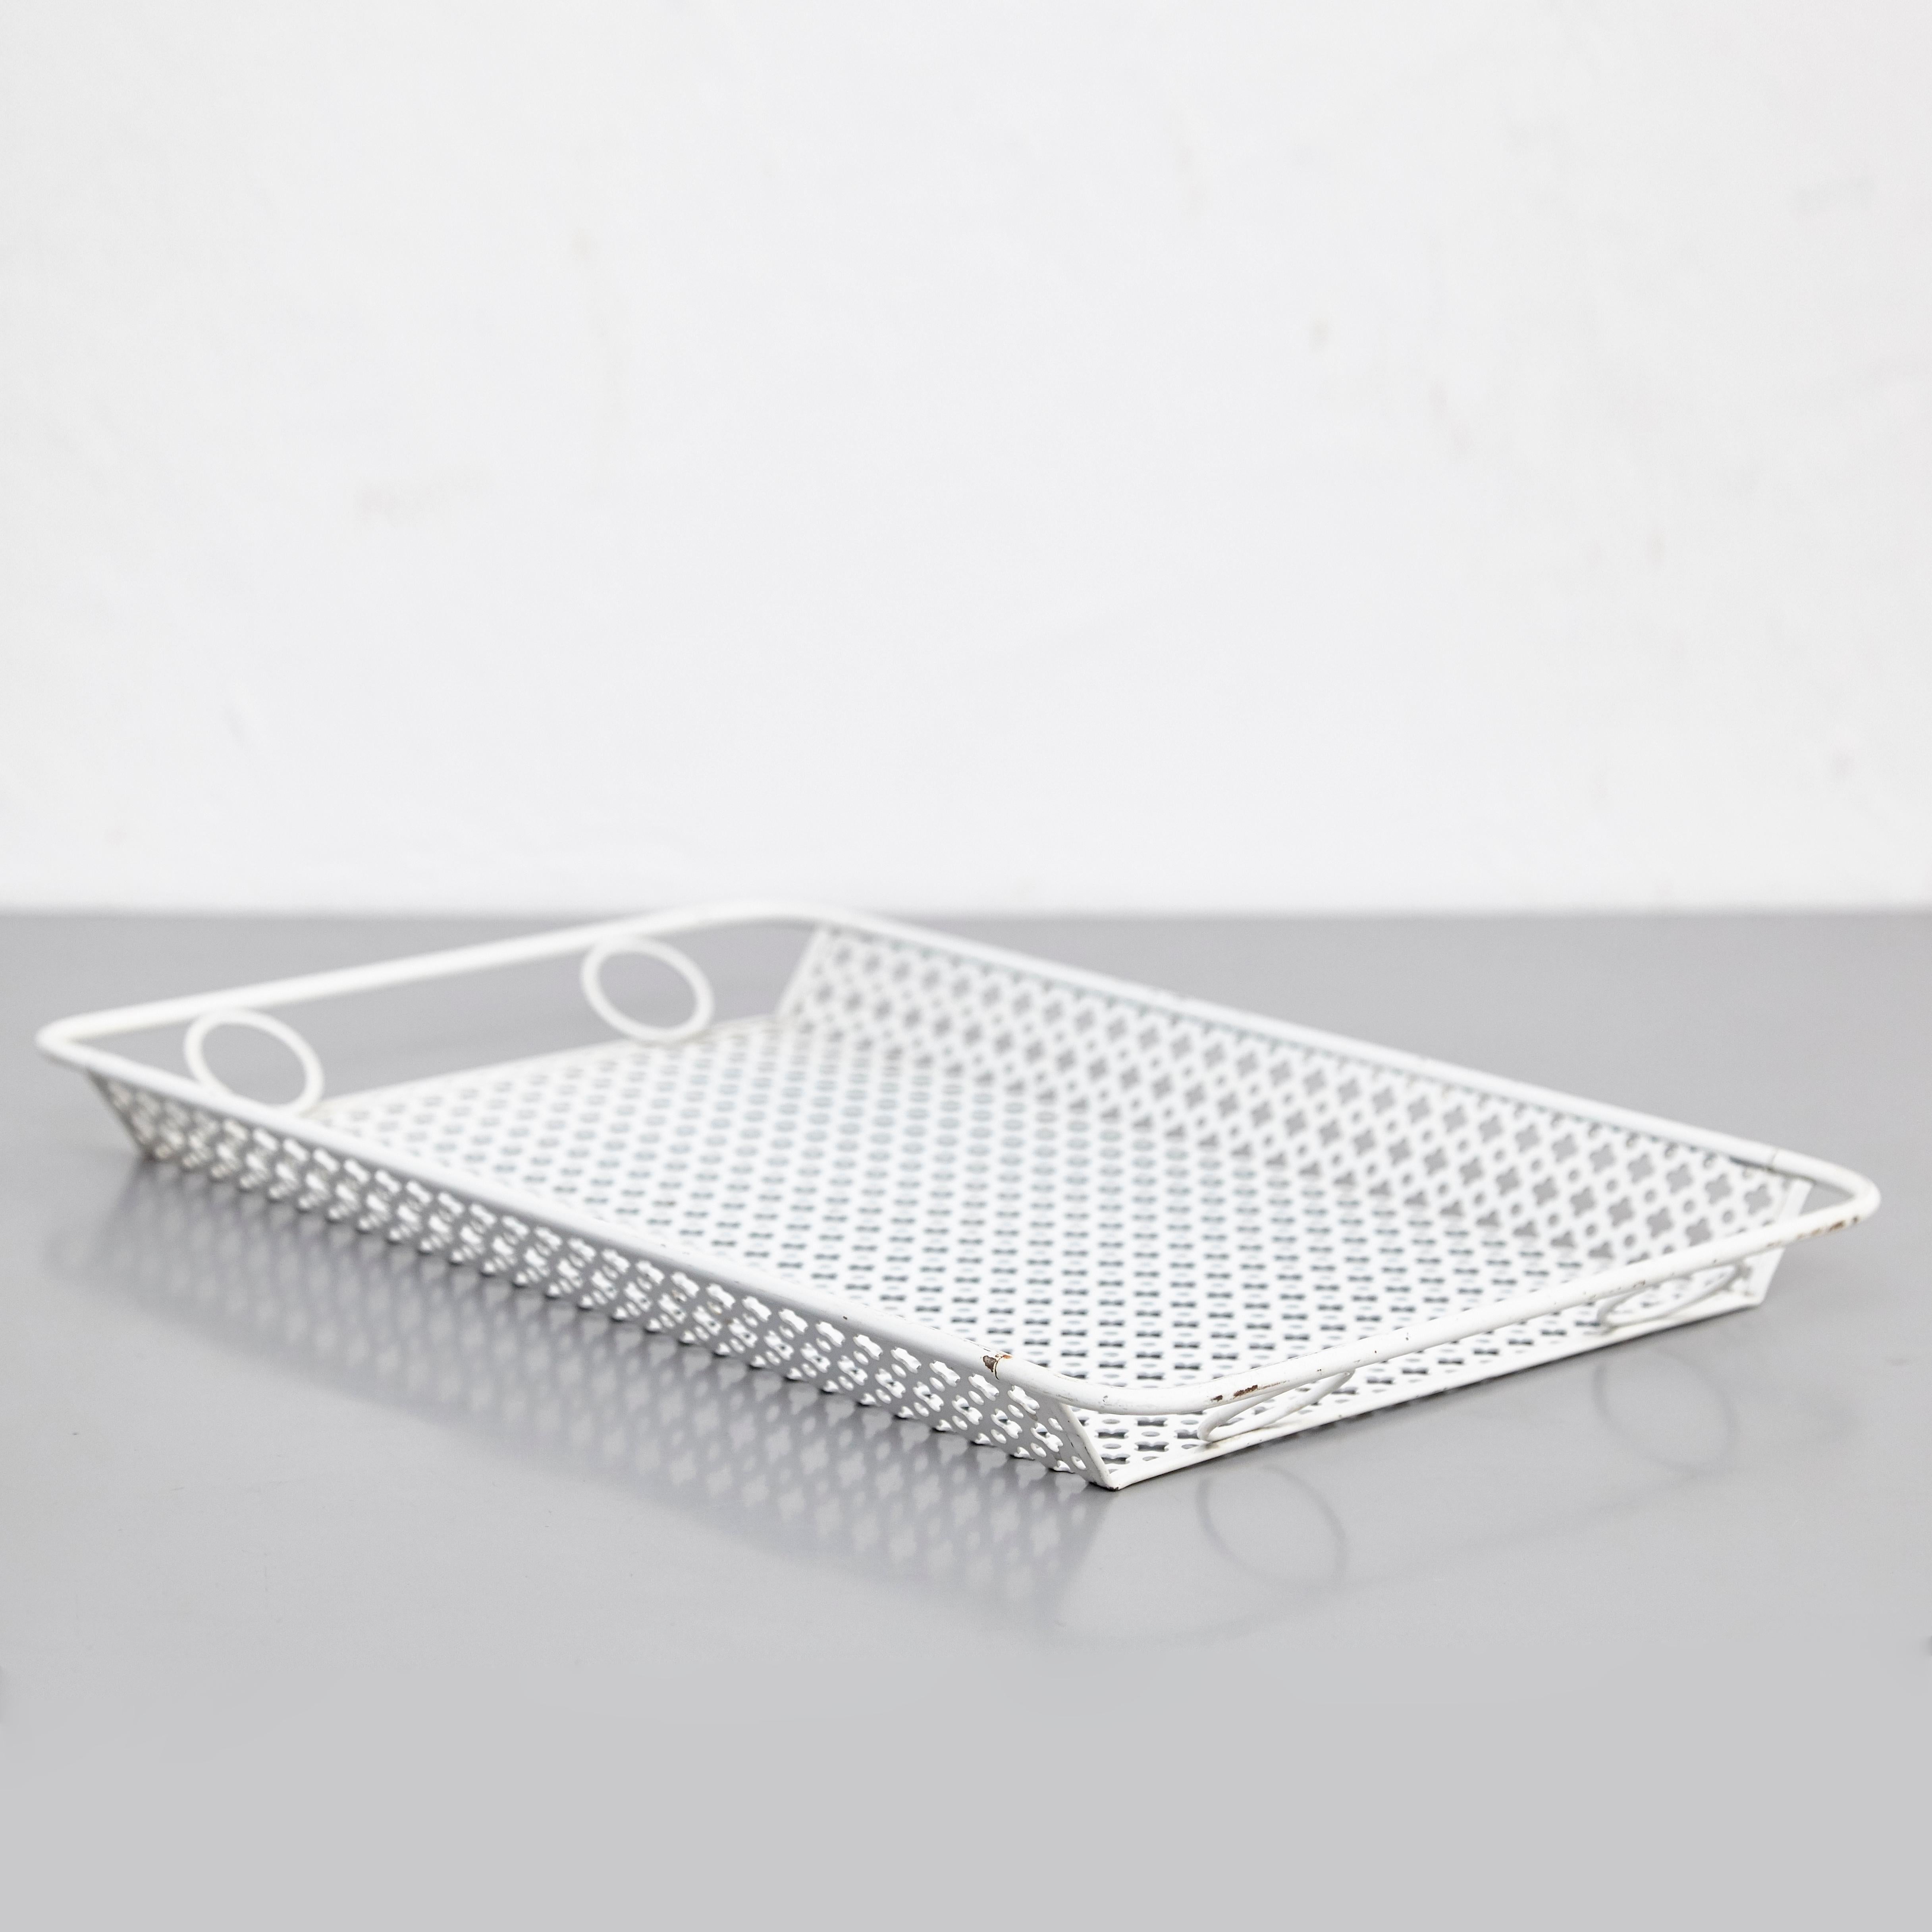 Enameled metal Tray designed by Mathieu Mate´got.
Manufactured by Ateliers Mate´got (France), circa 1950.
Lacquered perforated metal with original paint.

In good original condition, with minor wear consistent with age and use, preserving a